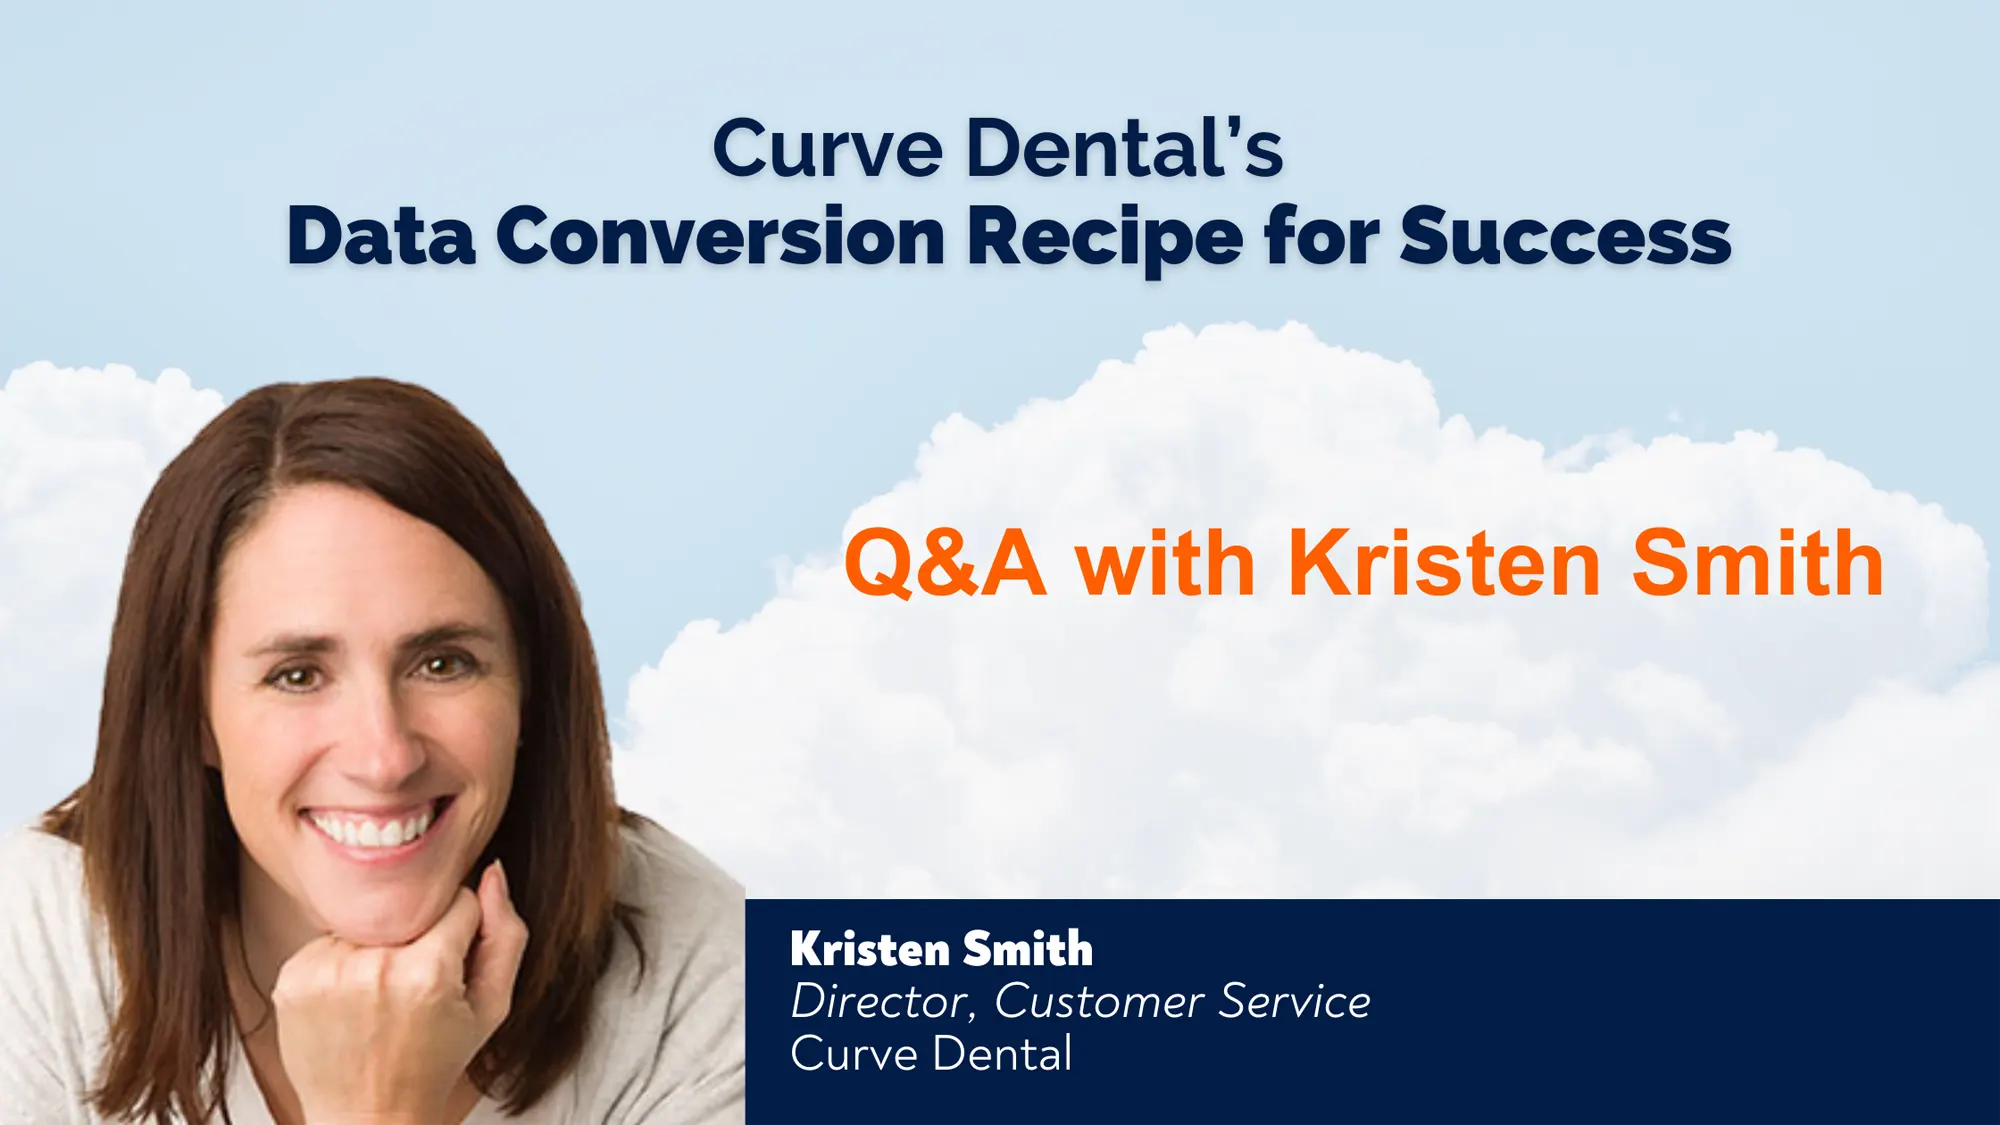 Q&A with Kristen Smith: Director of Customer Service